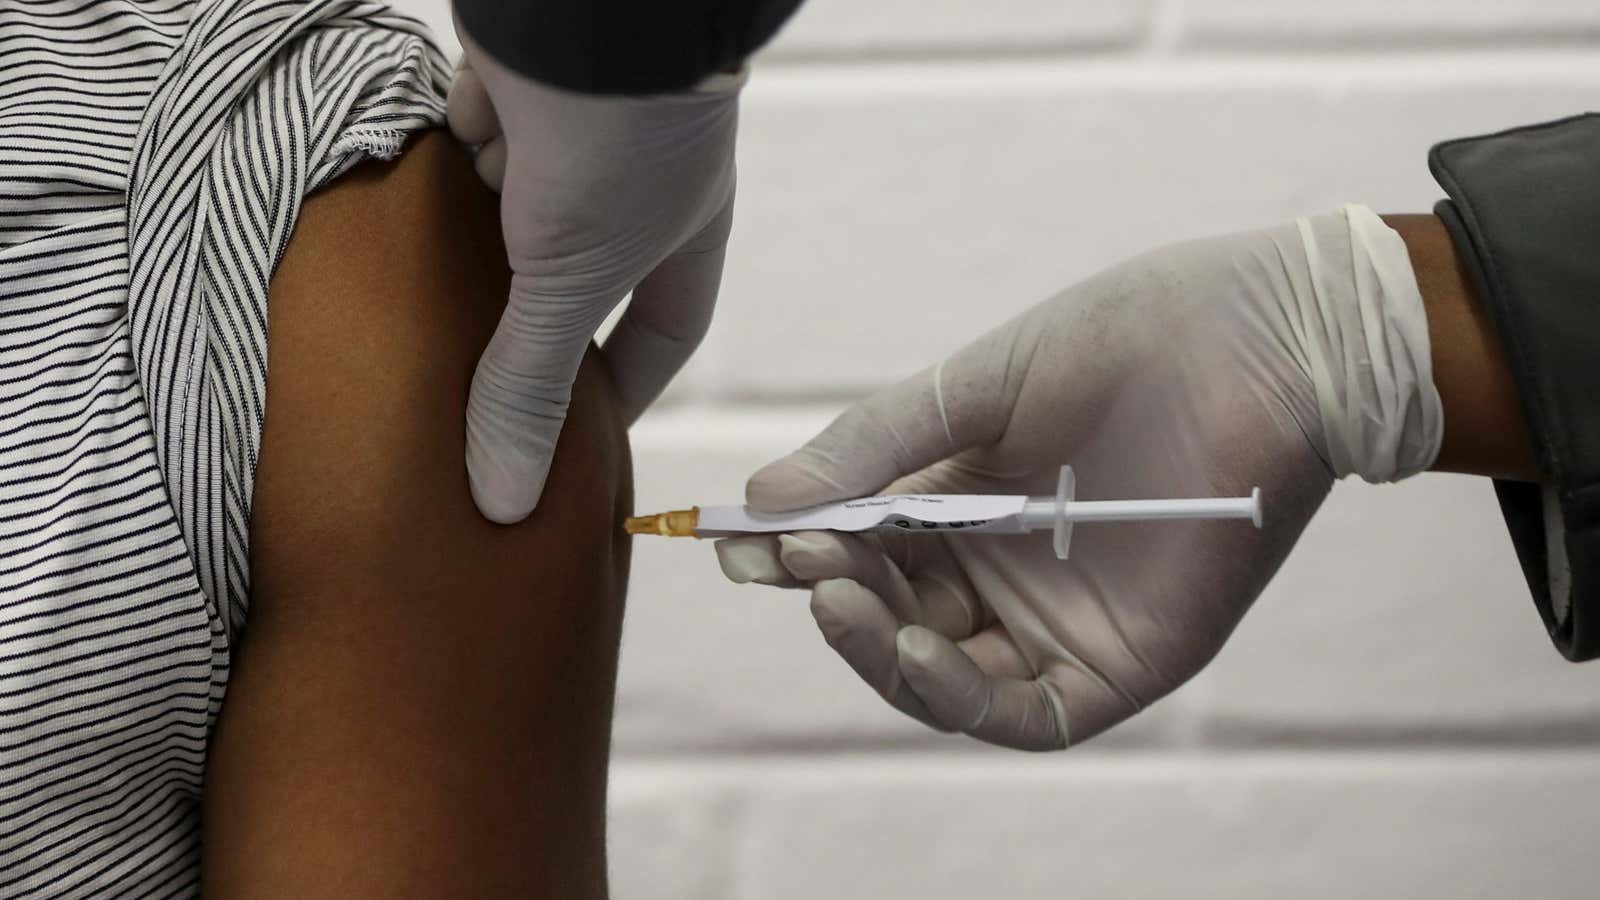 A volunteer receives an injection from a medical worker during the South Africa’s first human clinical trial for a potential vaccine against the novel coronavirus in Soweto, South Africa, June 24, 2020.